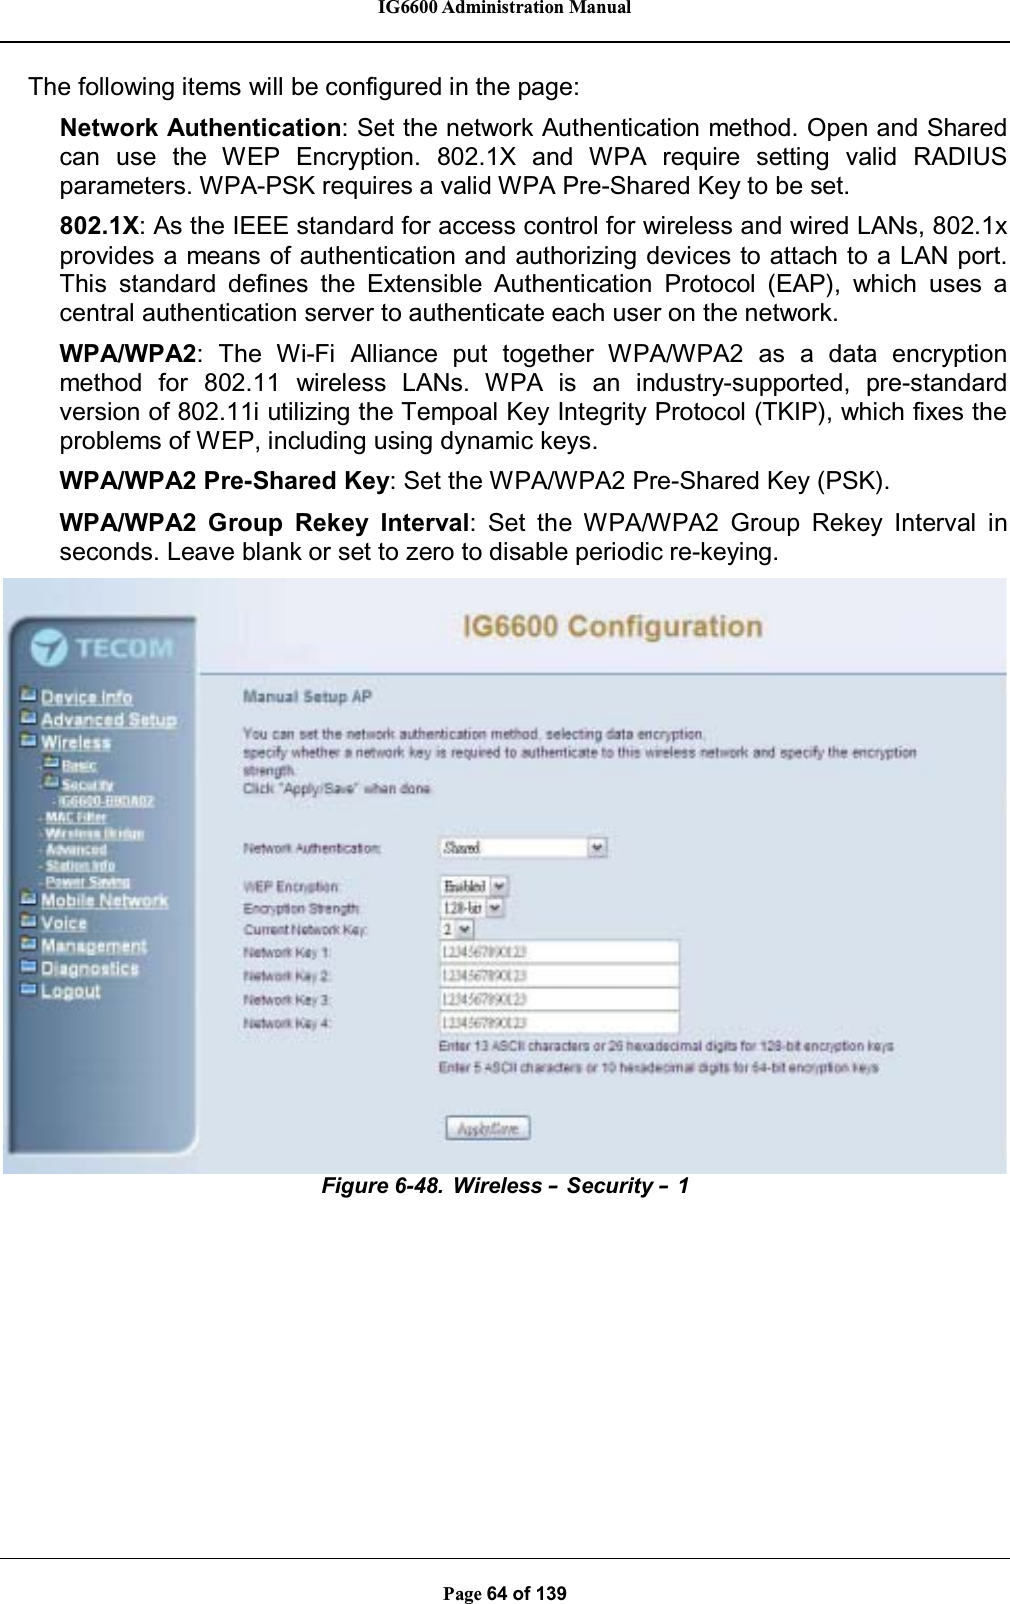 IG6600 Administration ManualPage 64 of 139The following items will be configured in the page:Network Authentication: Set the network Authentication method. Open and Sharedcan use the WEP Encryption. 802.1X and WPA require setting valid RADIUSparameters. WPA-PSK requires a valid WPA Pre-Shared Key to be set.802.1X: As the IEEE standard for access control for wireless and wired LANs, 802.1xprovides a means of authentication and authorizing devices to attach to a LAN port.This standard defines the Extensible Authentication Protocol (EAP), which uses acentral authentication server to authenticate each user on the network.WPA/WPA2: The Wi-Fi Alliance put together WPA/WPA2 as a data encryptionmethod for 802.11 wireless LANs. WPA is an industry-supported, pre-standardversion of 802.11i utilizing the Tempoal Key Integrity Protocol (TKIP), which fixes theproblems of WEP, including using dynamic keys.WPA/WPA2 Pre-Shared Key: Set the WPA/WPA2 Pre-Shared Key (PSK).WPA/WPA2 Group Rekey Interval: Set the WPA/WPA2 Group Rekey Interval inseconds. Leave blank or set to zero to disable periodic re-keying.Figure 6-48. Wireless –Security –1